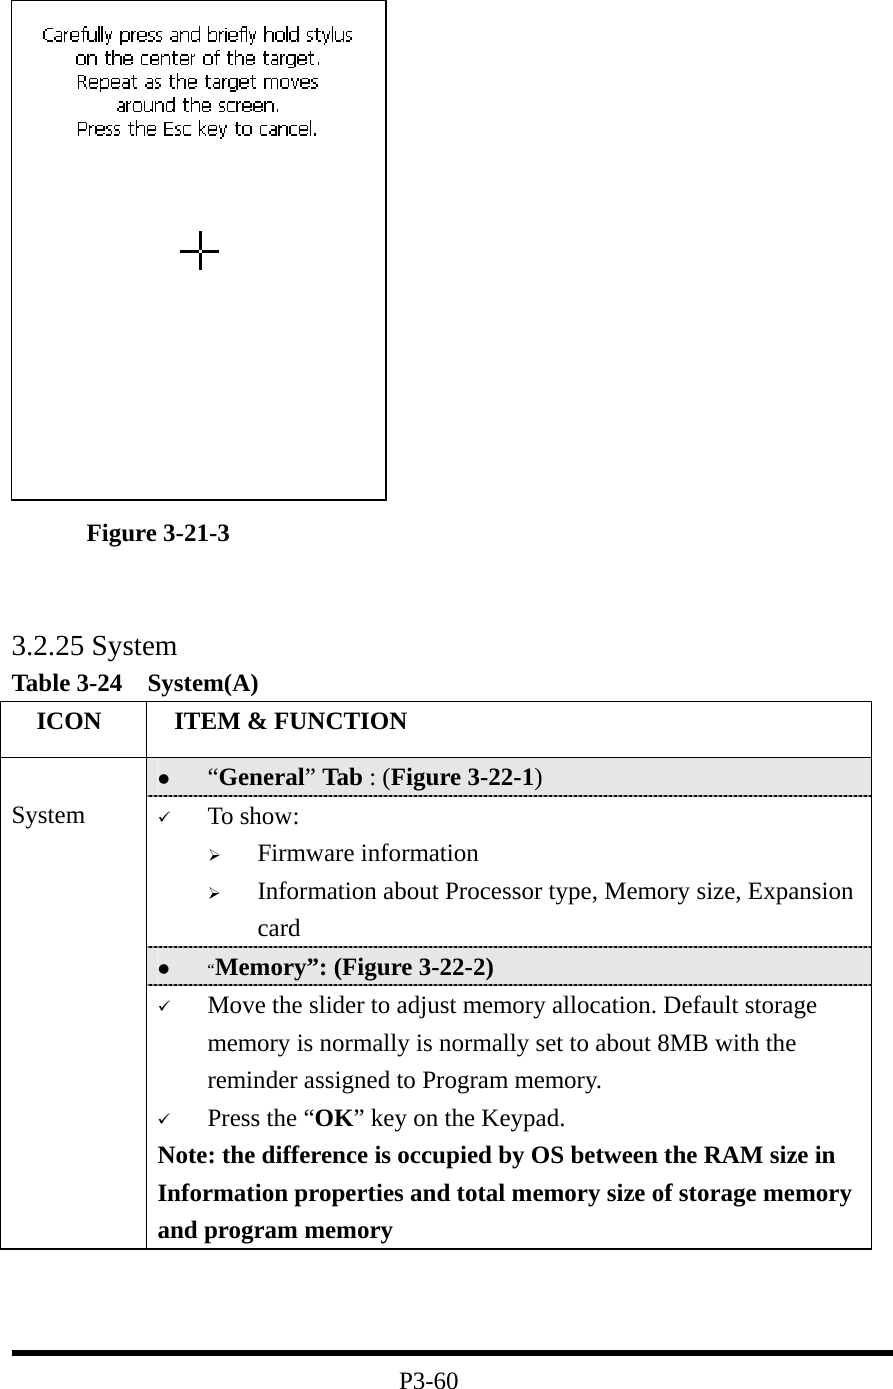           Figure 3-21-3                              3.2.25 System Table 3-24  System(A)   ICON   ITEM &amp; FUNCTION   “General” Tab : (Figure 3-22-1)   To show:   Firmware information     Information about Processor type, Memory size, Expansion card   “Memory”: (Figure 3-22-2)  System   Move the slider to adjust memory allocation. Default storage memory is normally is normally set to about 8MB with the reminder assigned to Program memory.   Press the “OK” key on the Keypad.   Note: the difference is occupied by OS between the RAM size in Information properties and total memory size of storage memory and program memory      P3-60 